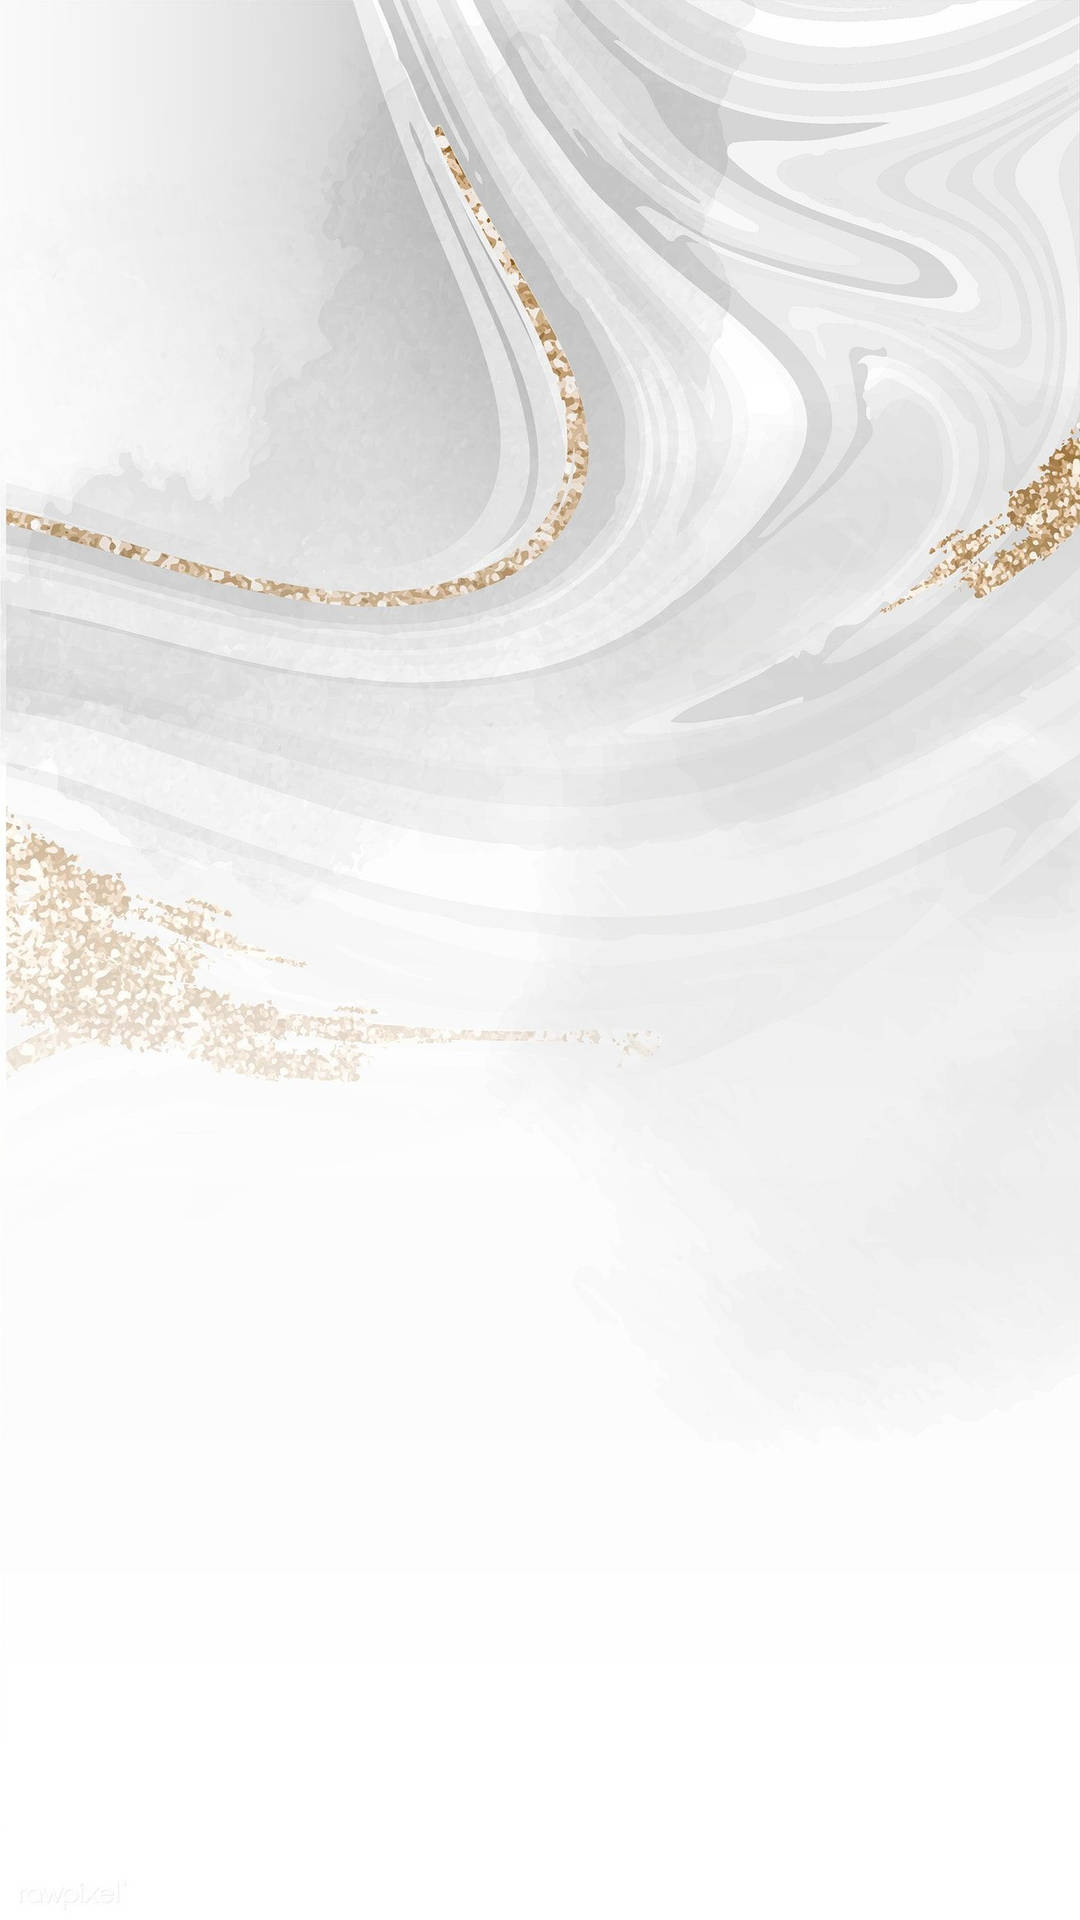 Flowing White And Gold Background Background